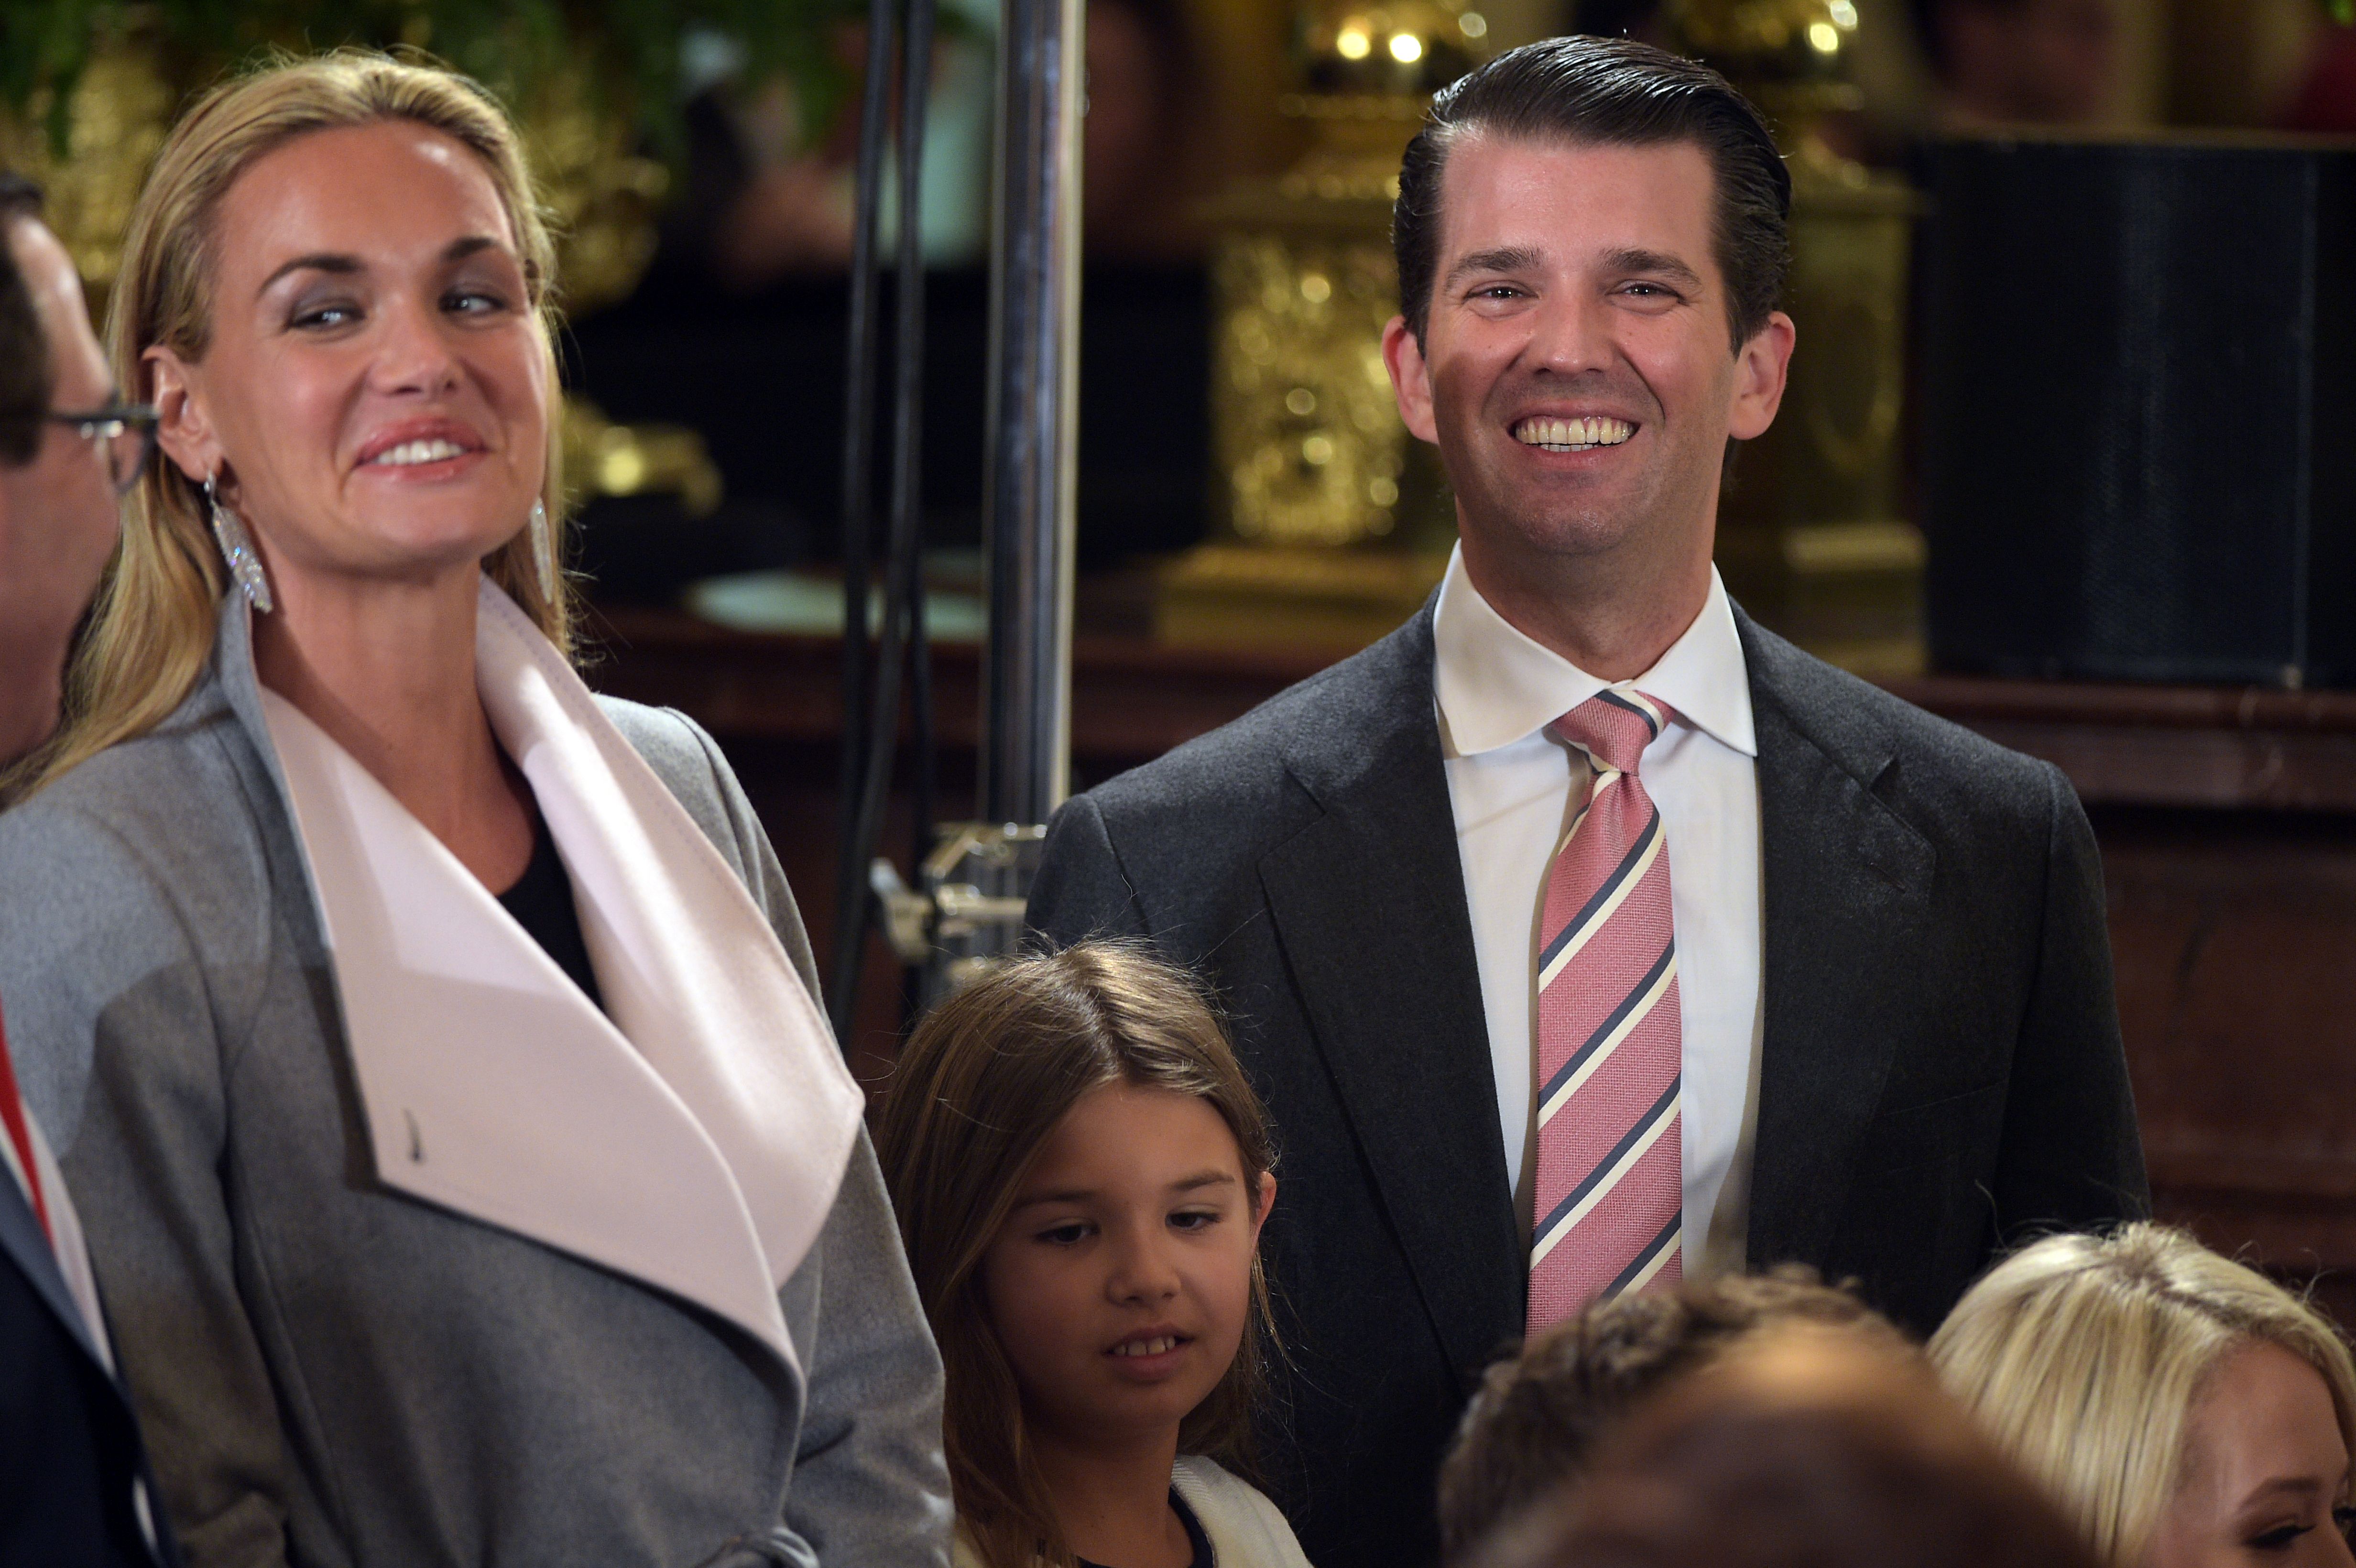 Donald Trump, Jr., (R) his wife Vanessa (L) and their daughter Kai (C) attend the White House senior staff swearing in at the White House on January 22, 2017, in Washington, DC (MANDEL NGAN/AFP/Getty Images)